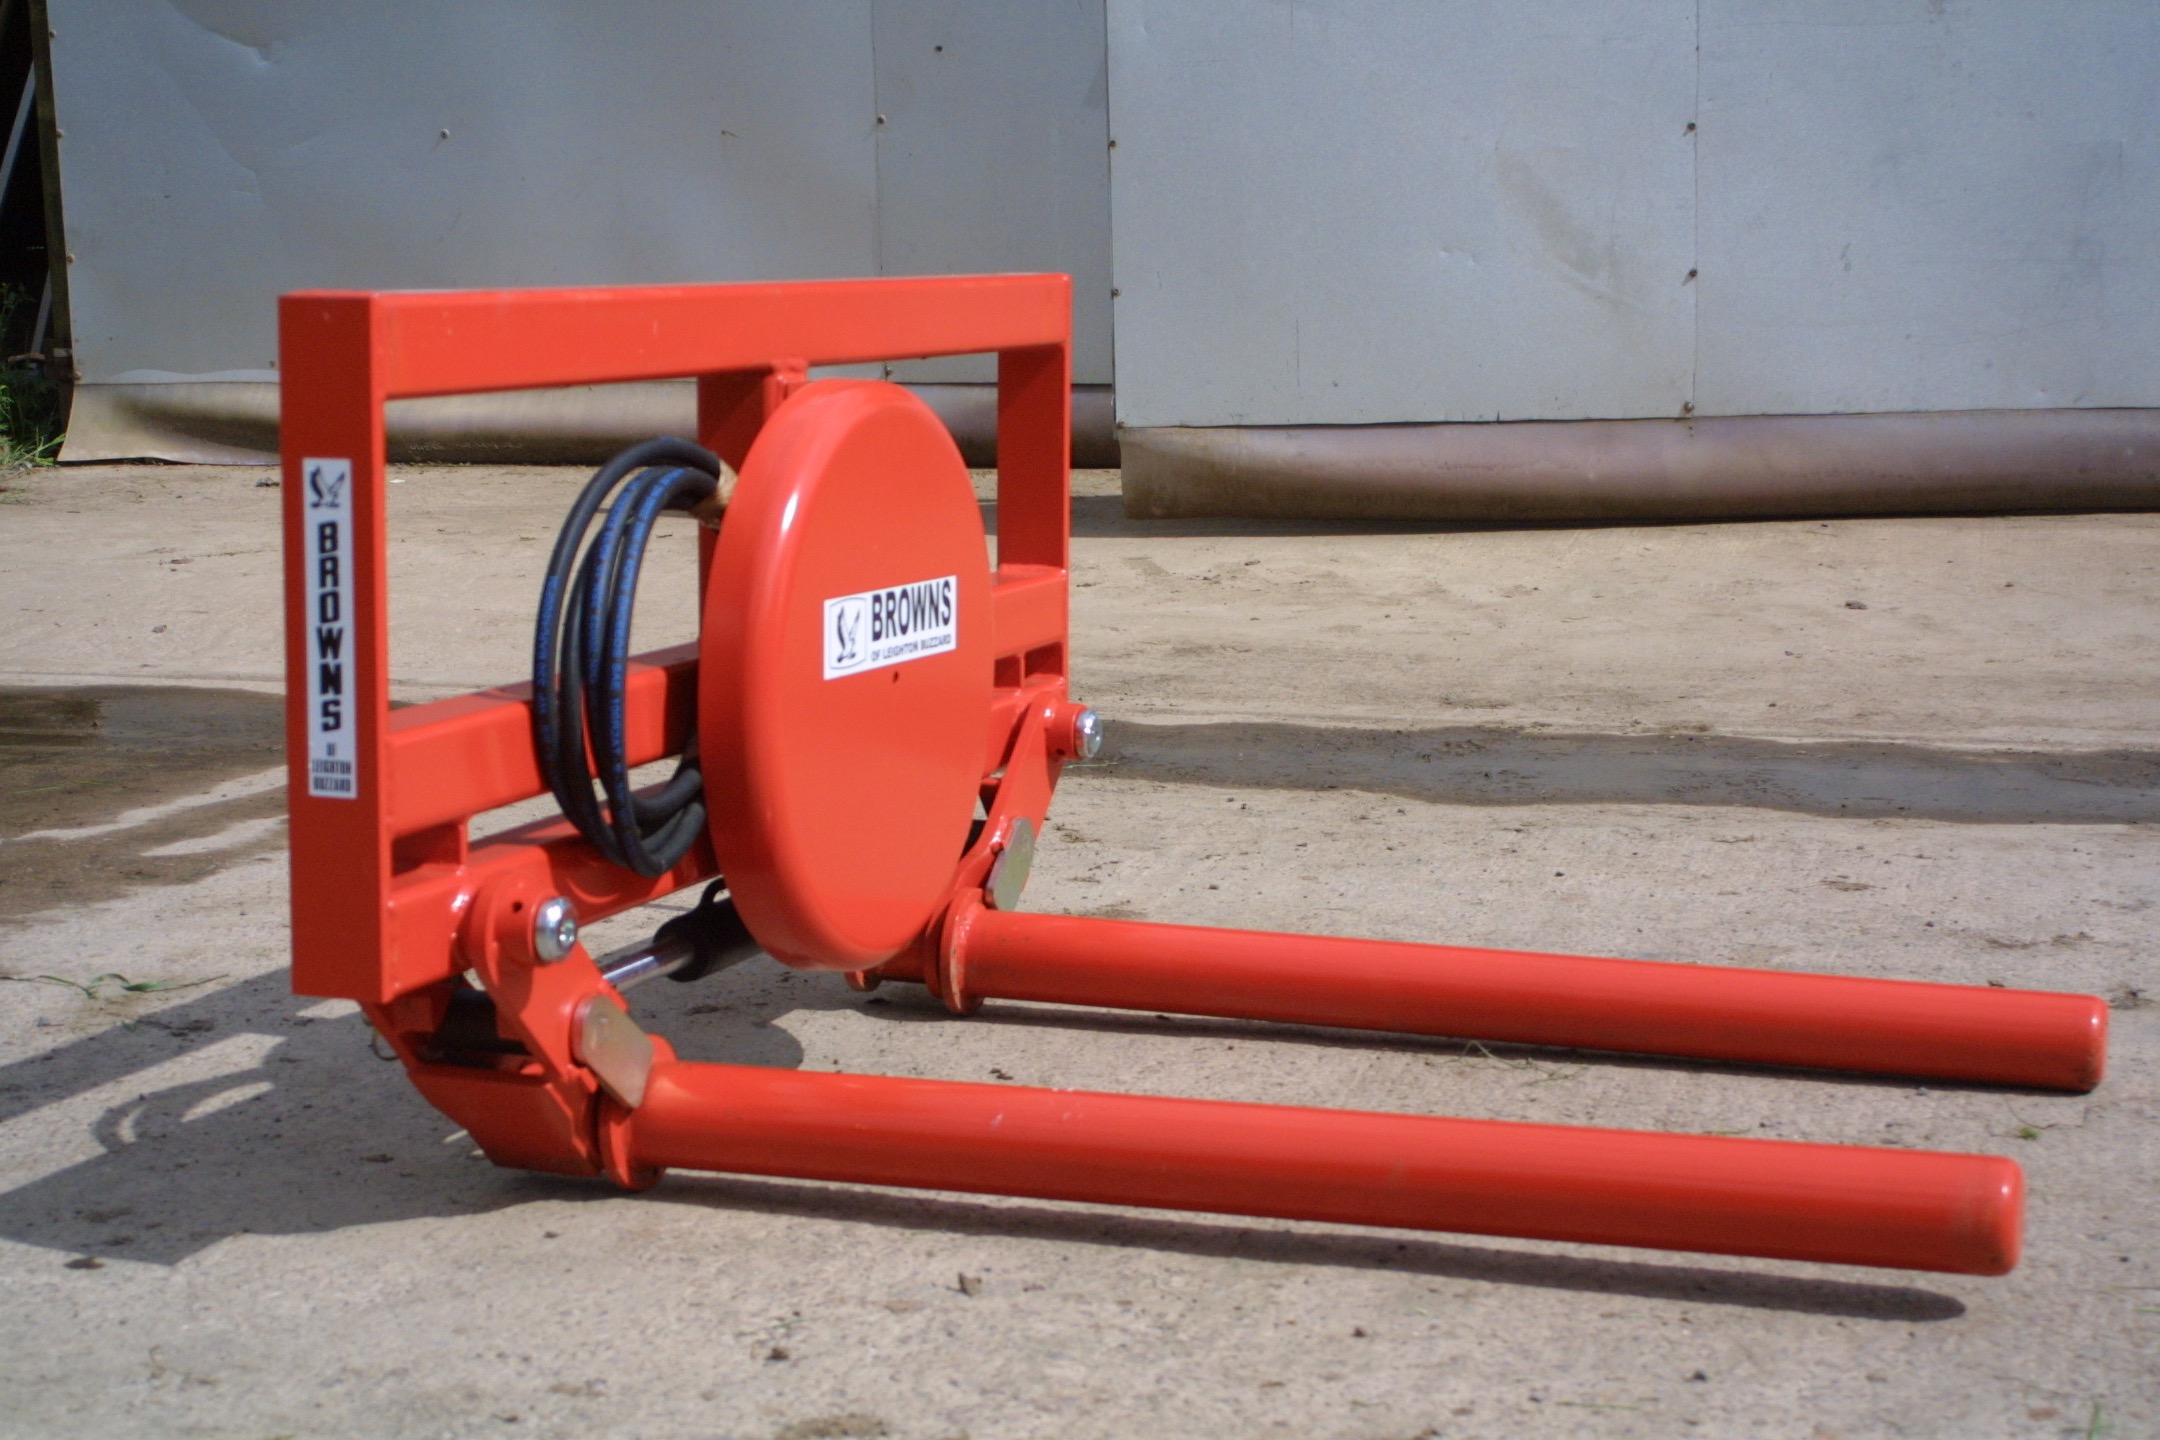 c/w removable rollers and hydraulic hoses